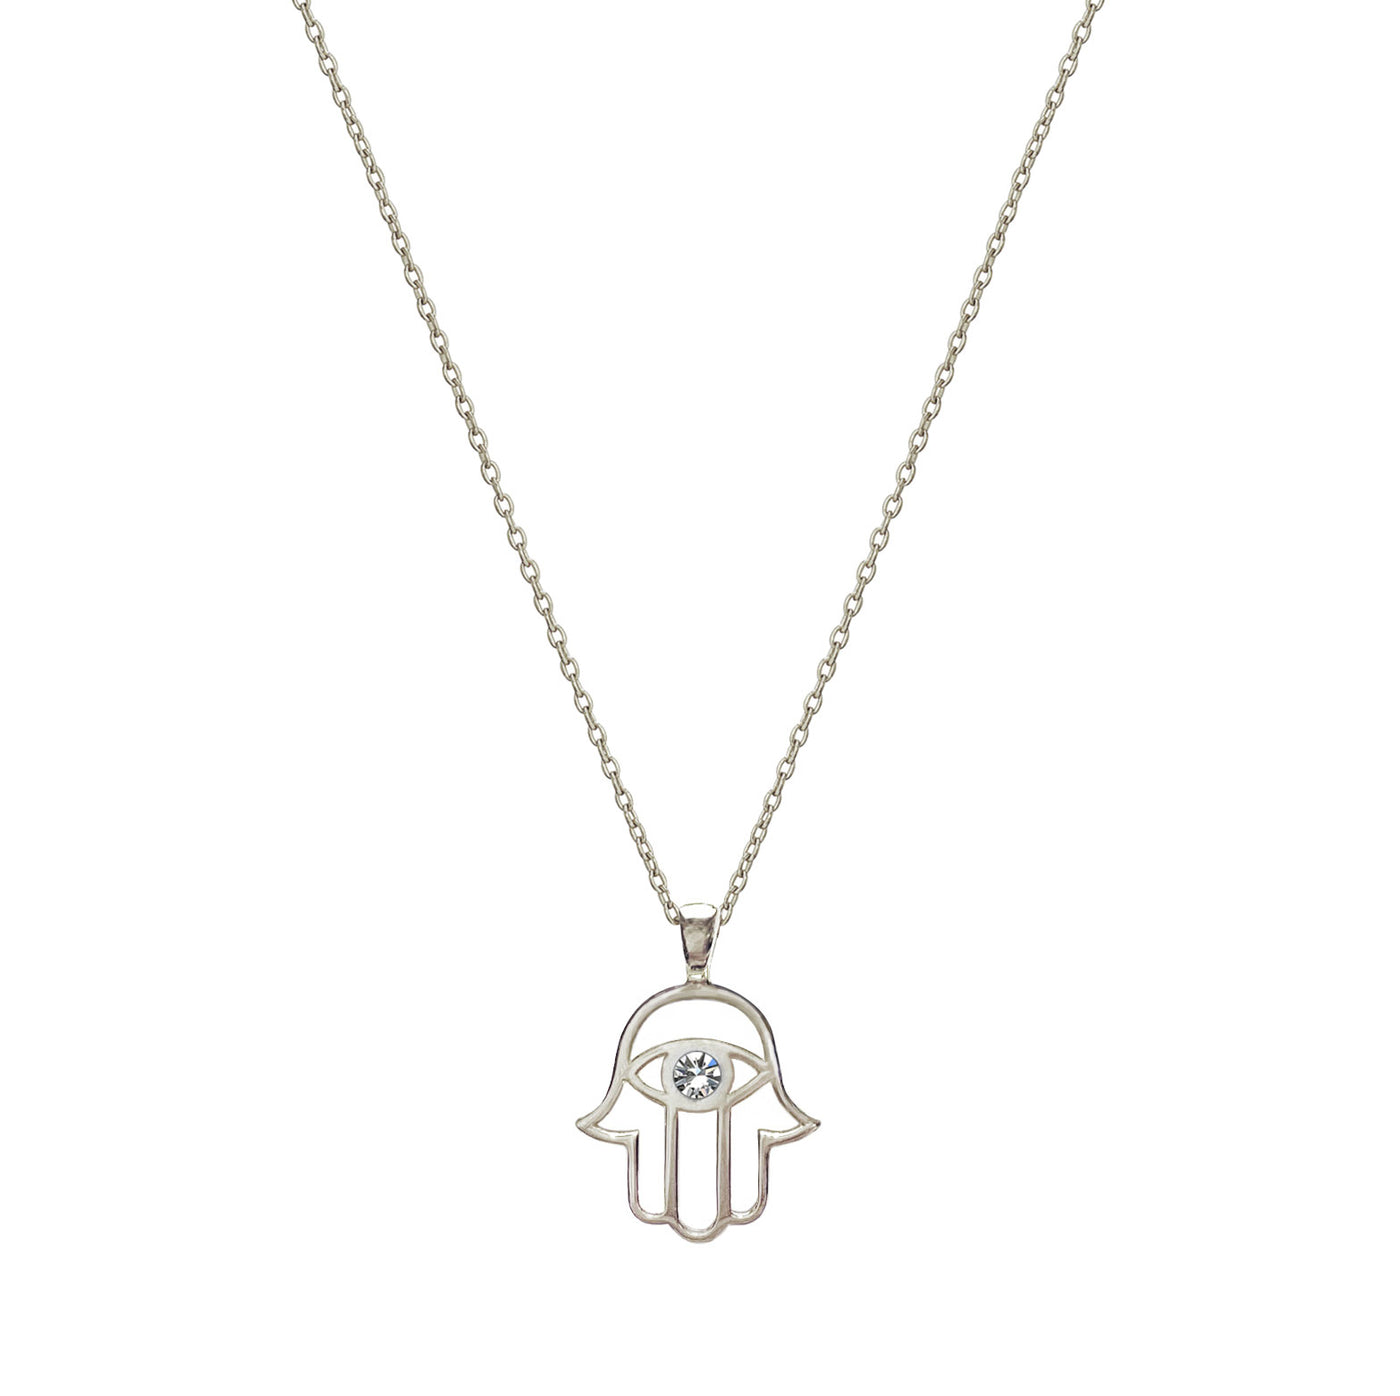 Sterling silver hamsa hand necklace with cz crystal